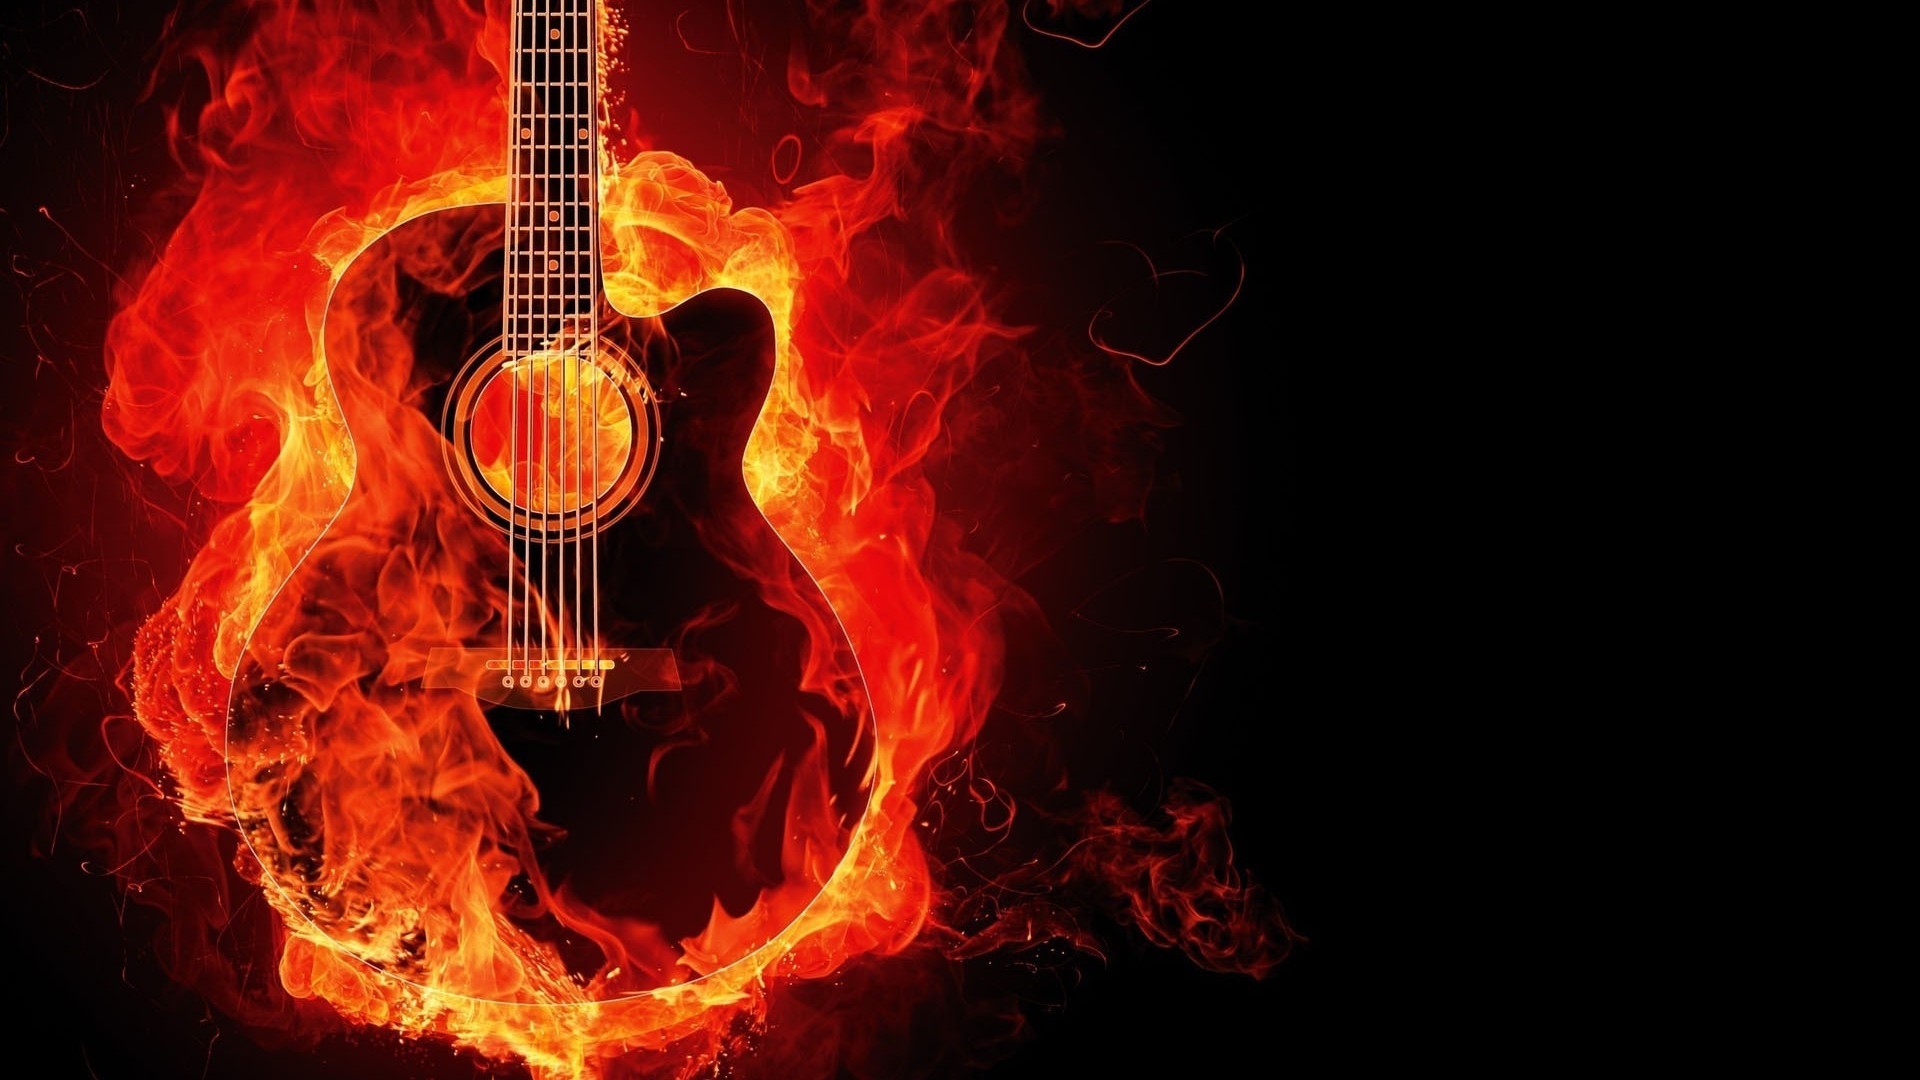 Fire Guitar Art 21270 Hd Wallpapers - Cool Pictures Of Guitars , HD Wallpaper & Backgrounds